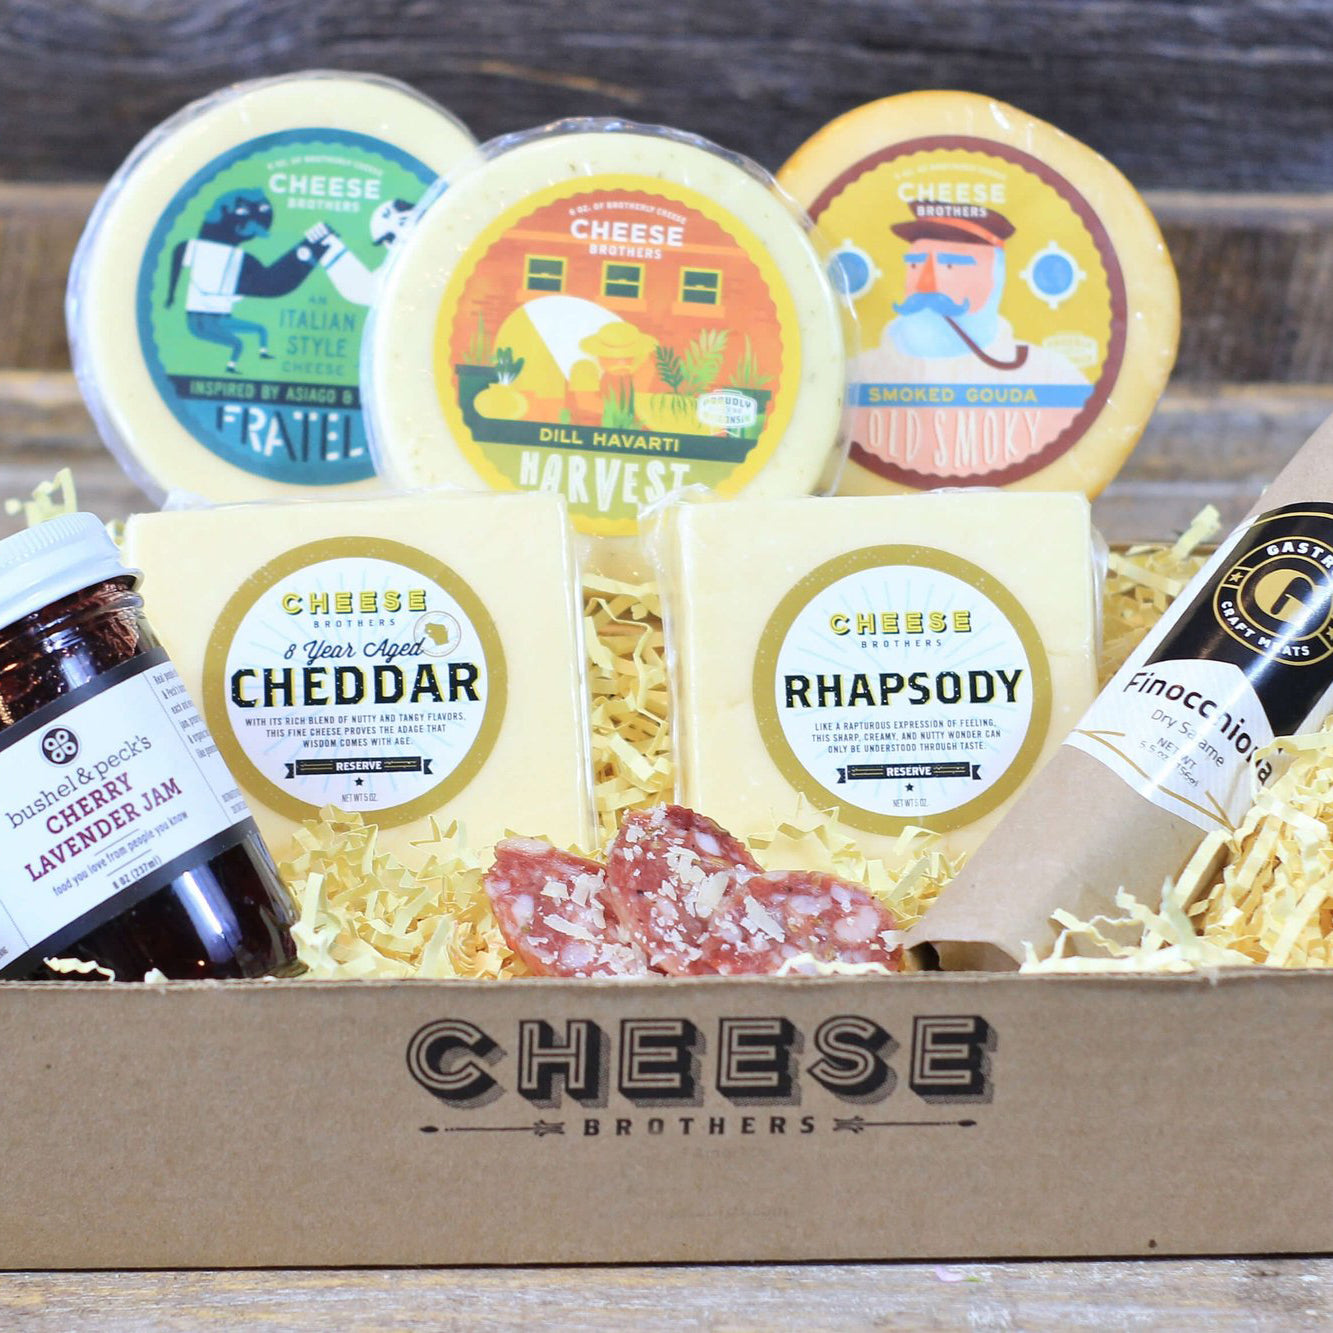 Cheese Brothers charcuterie delivery box with cheese, jam, and dry age salami.